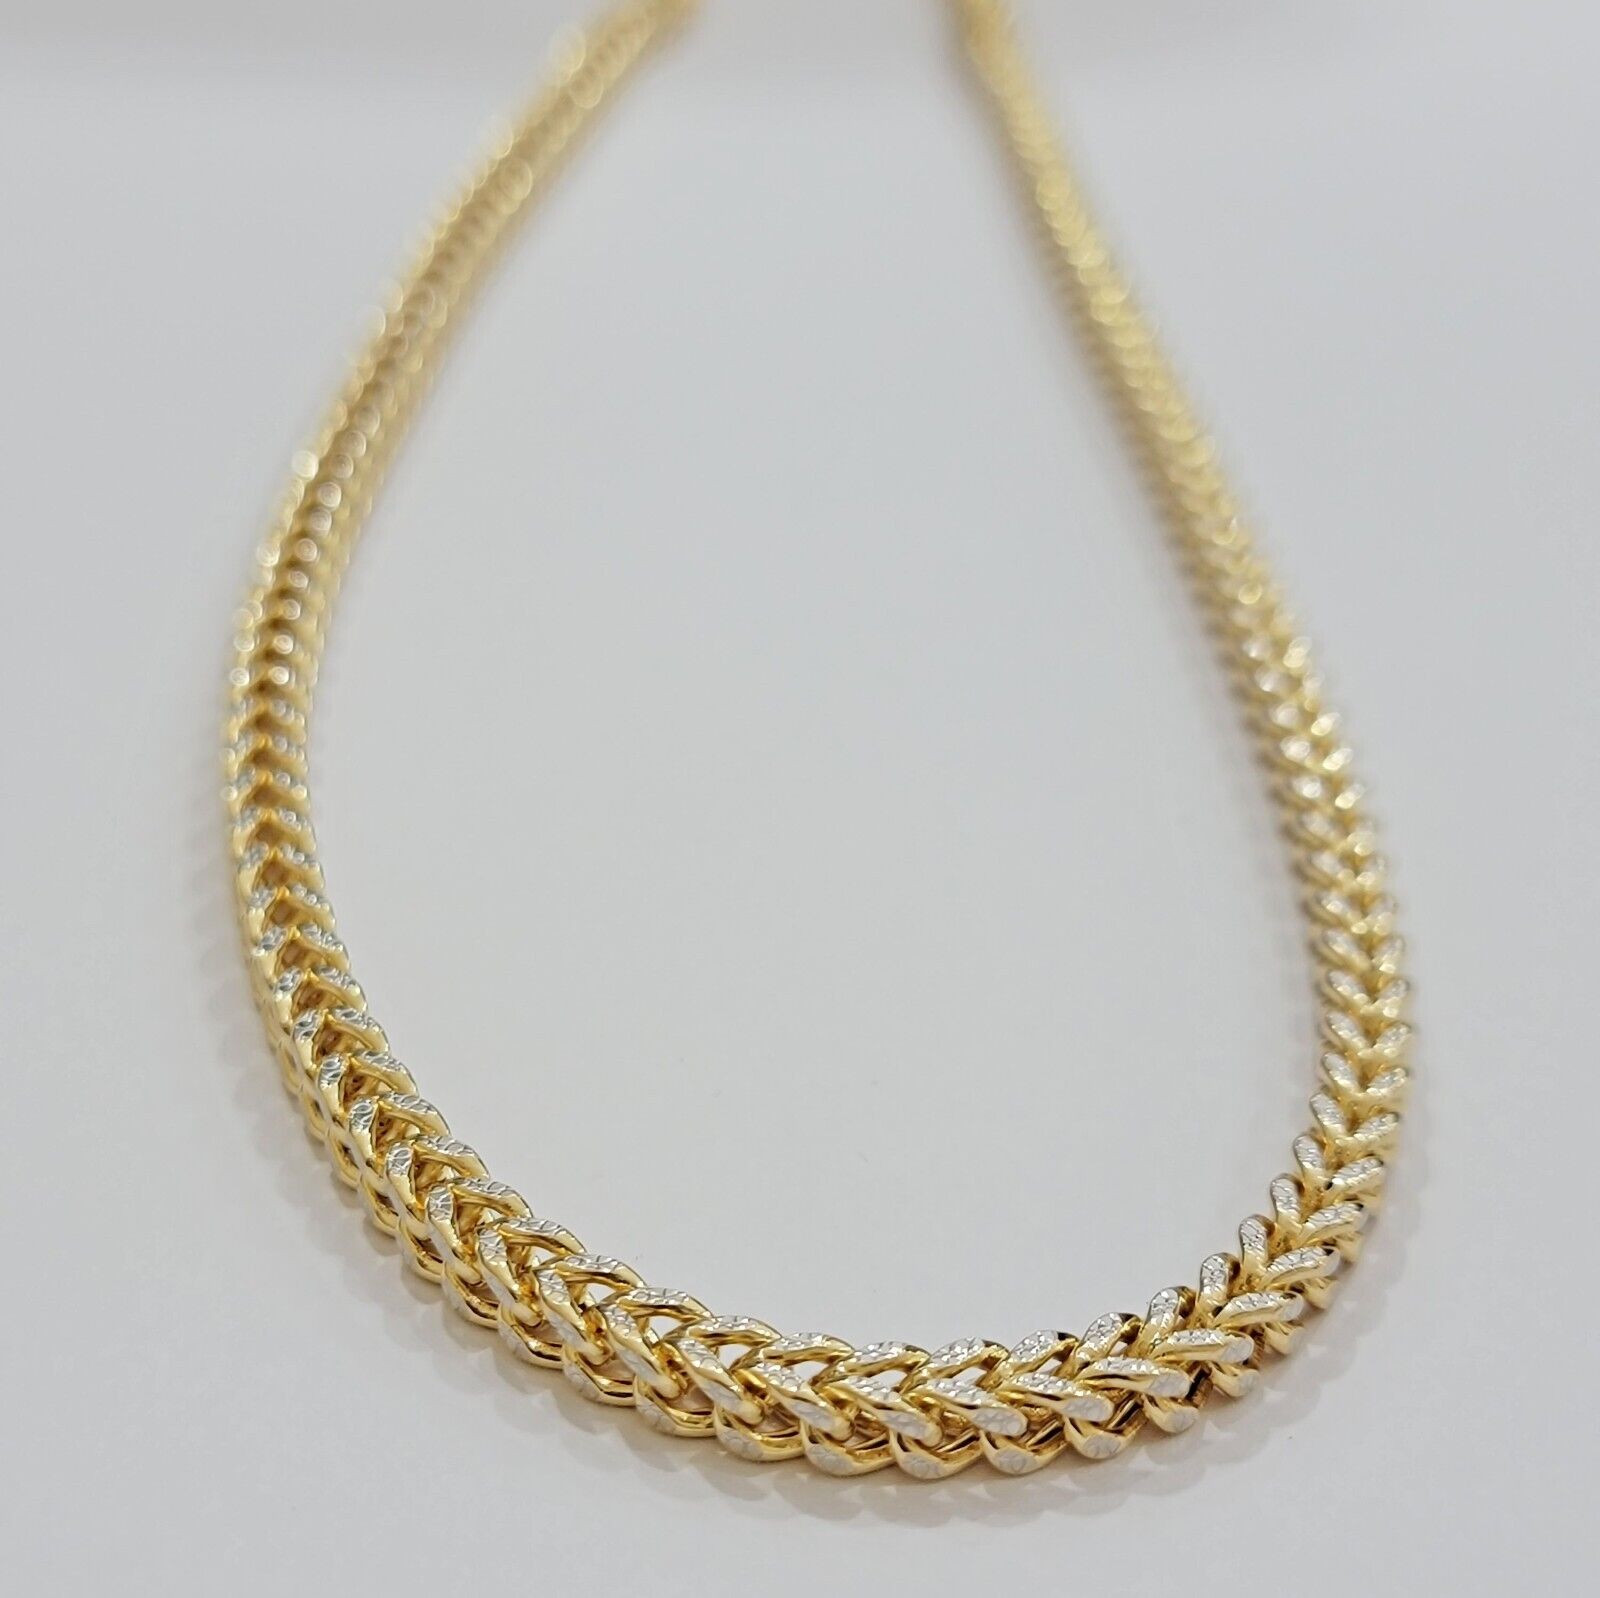 7mm Diamond Cut Franco Chain, 14K Gold Chain Men’s Solid Gold Necklace 24 Inches / Luxury Lobster Clasp